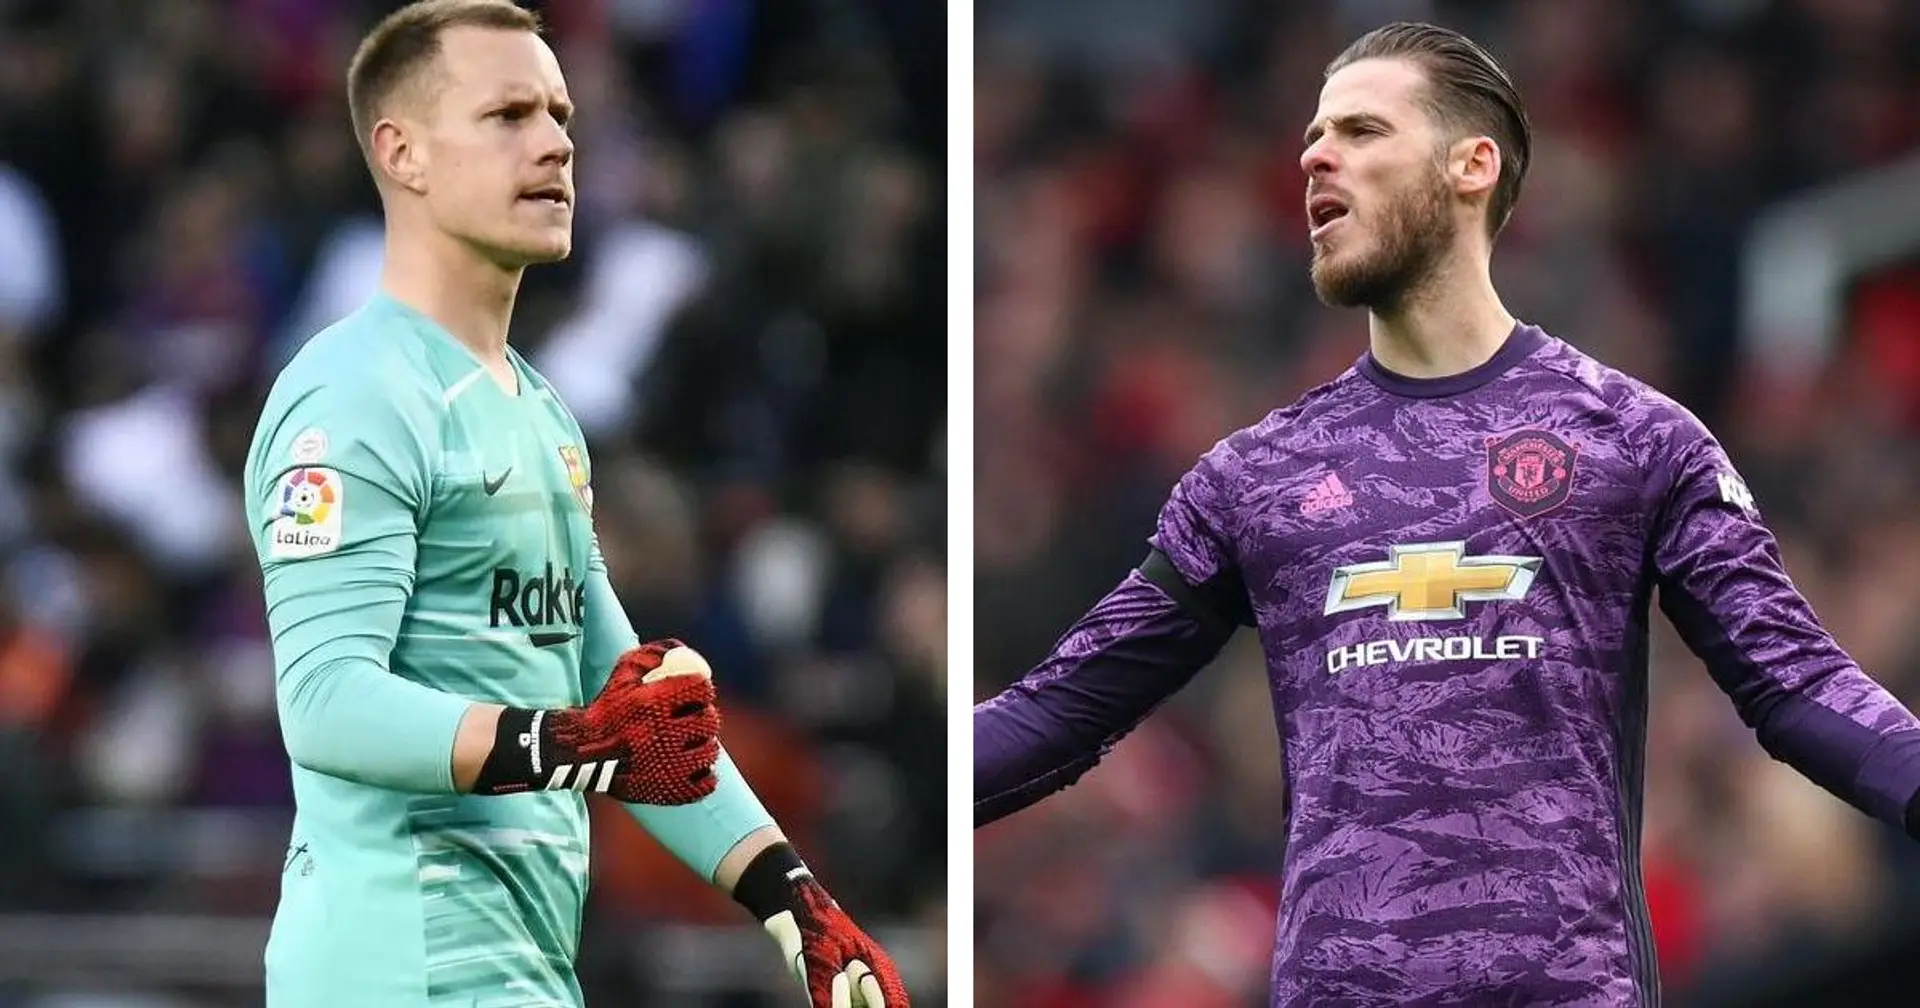 Staggering €11.5m less than De Gea and more: How Ter Stegen ranks among highest-paid world-class goalkeepers